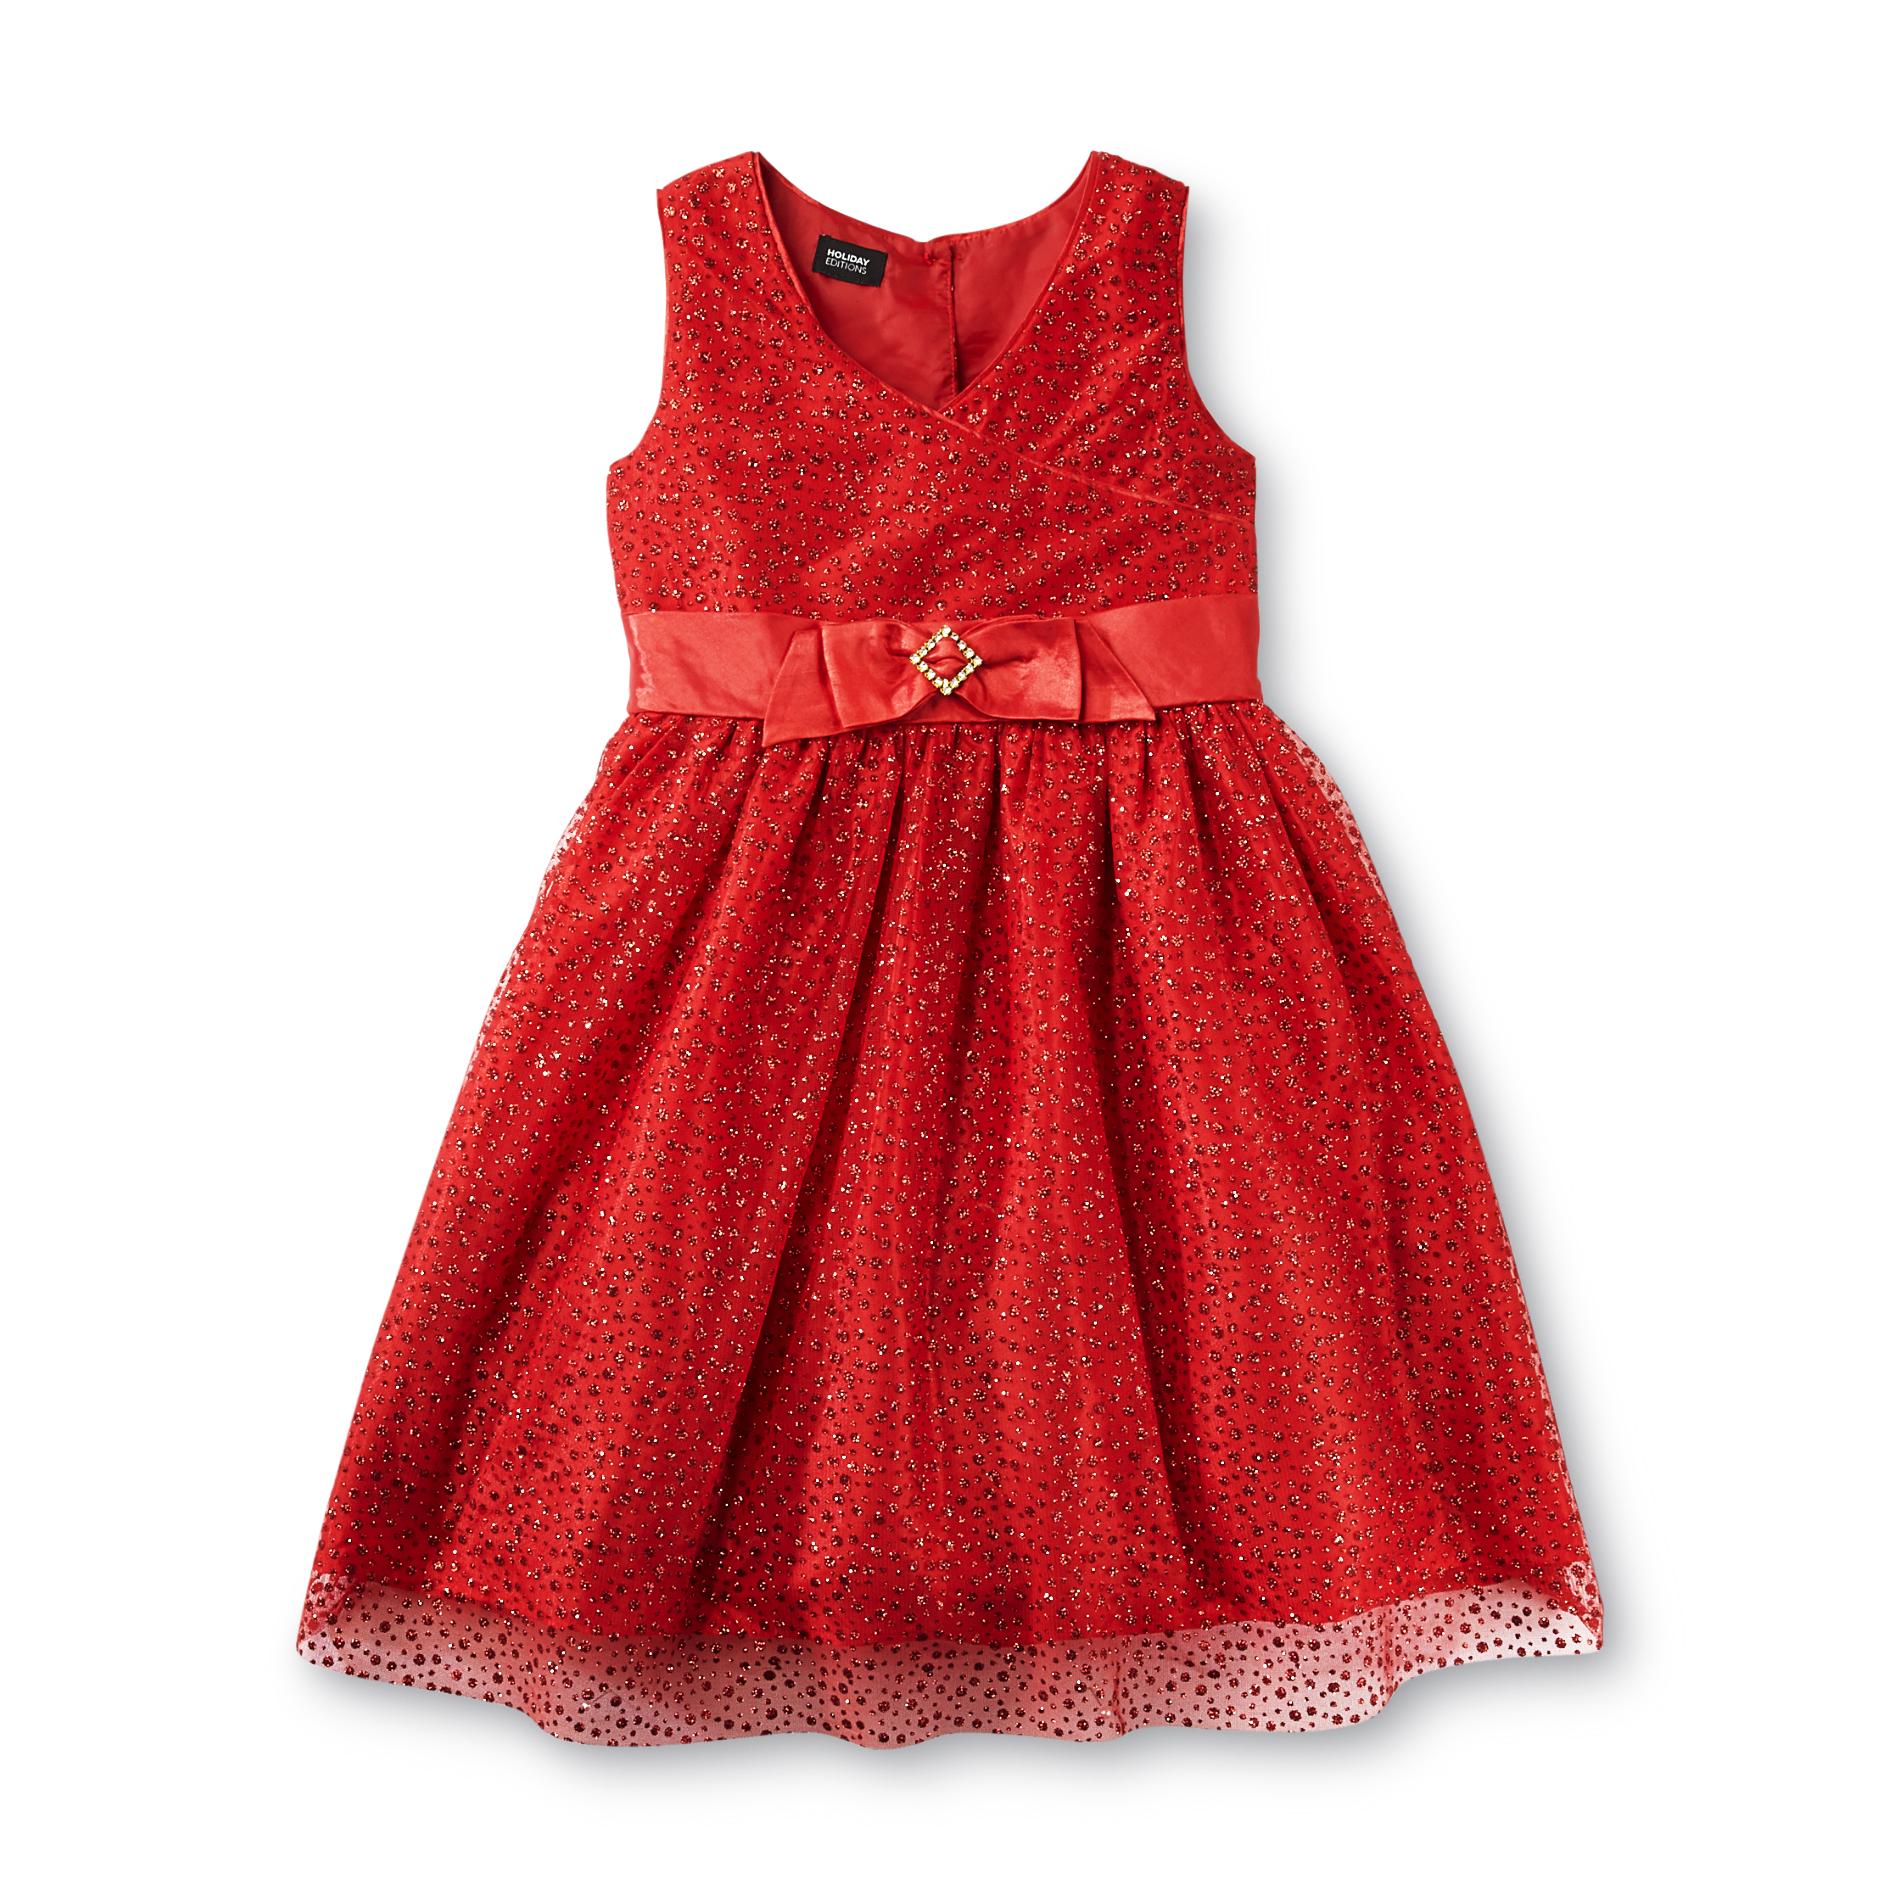 Holiday Editions Girl's Sleeveless Party Dress